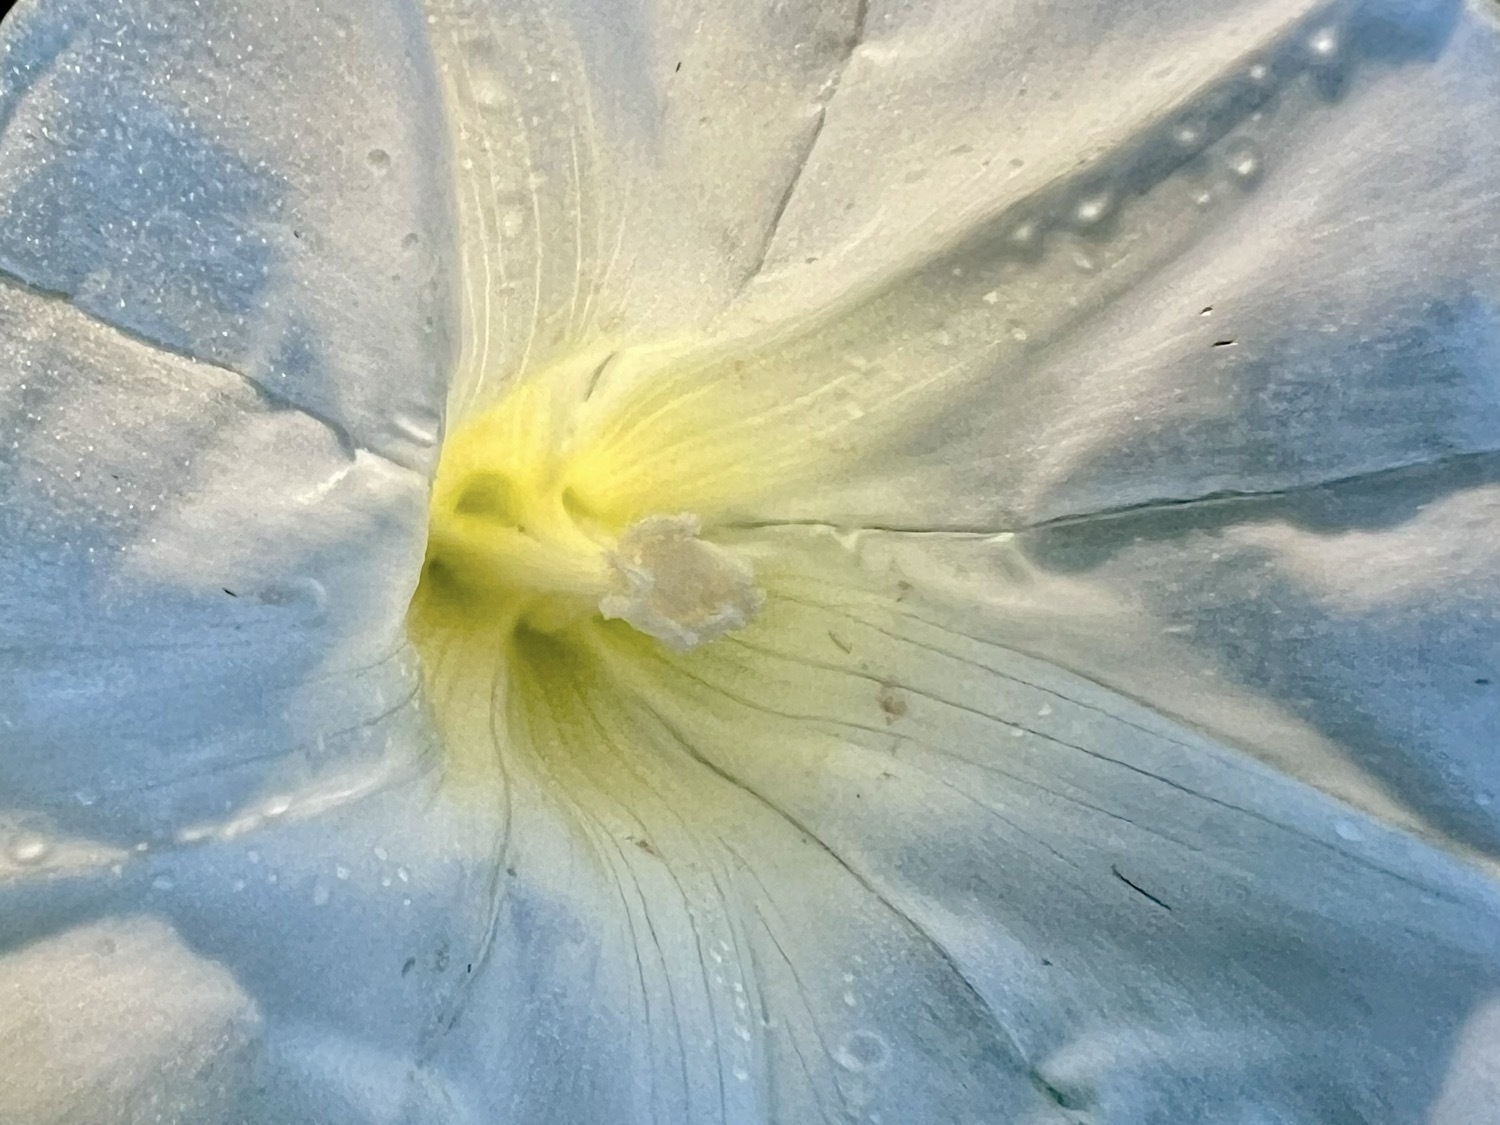 A whiteish flower with a yellow center is softly backlit by the morning sun and it seems to glow. Small dew droplets are visible on the petals.